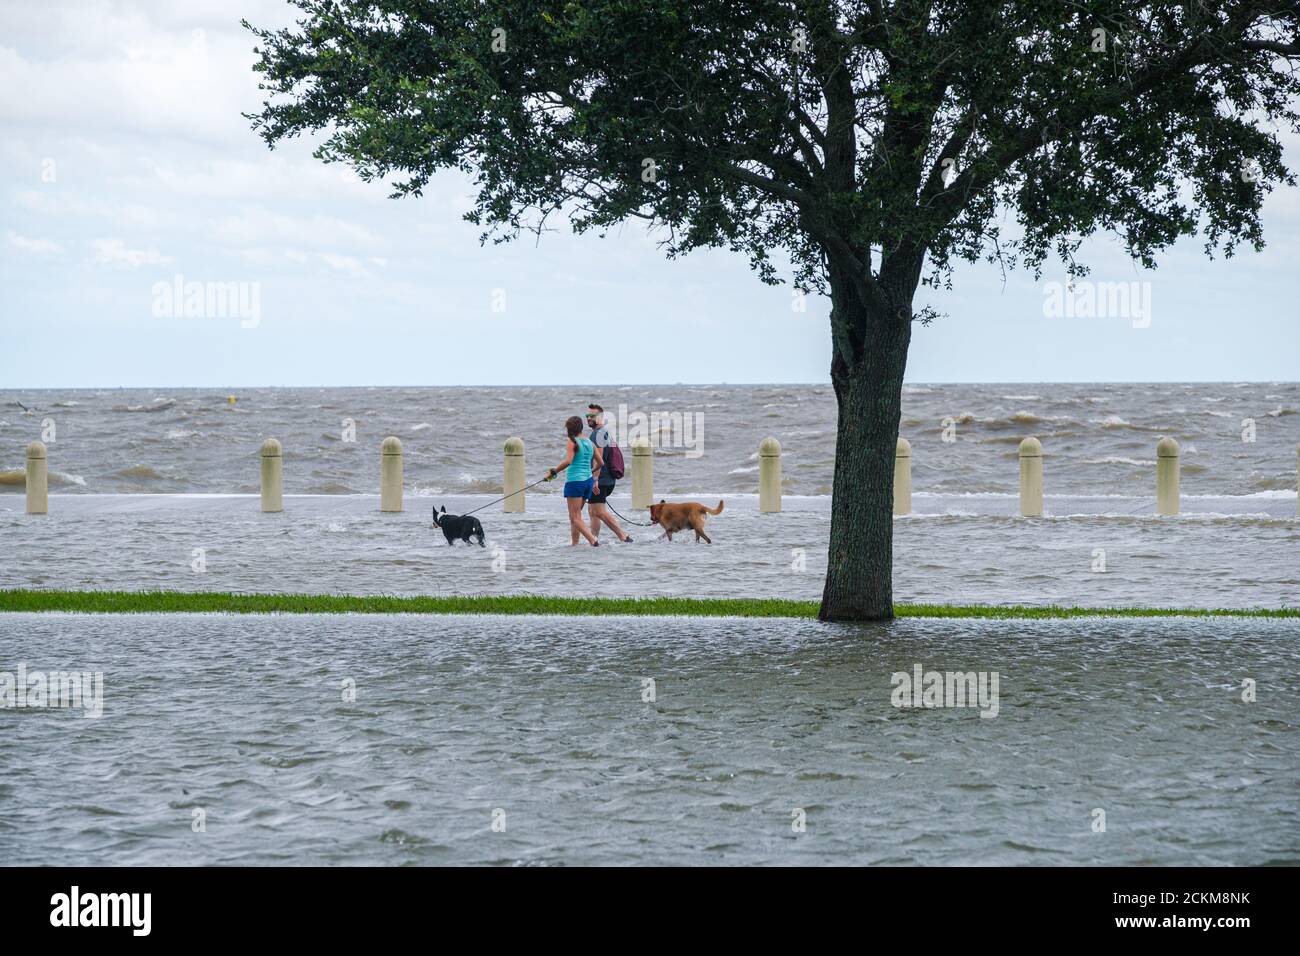 New Orleans, Louisiana/USA - 9/15/2020: Couple with dogs wading in flooded street on Lake Pontchartrain Stock Photo